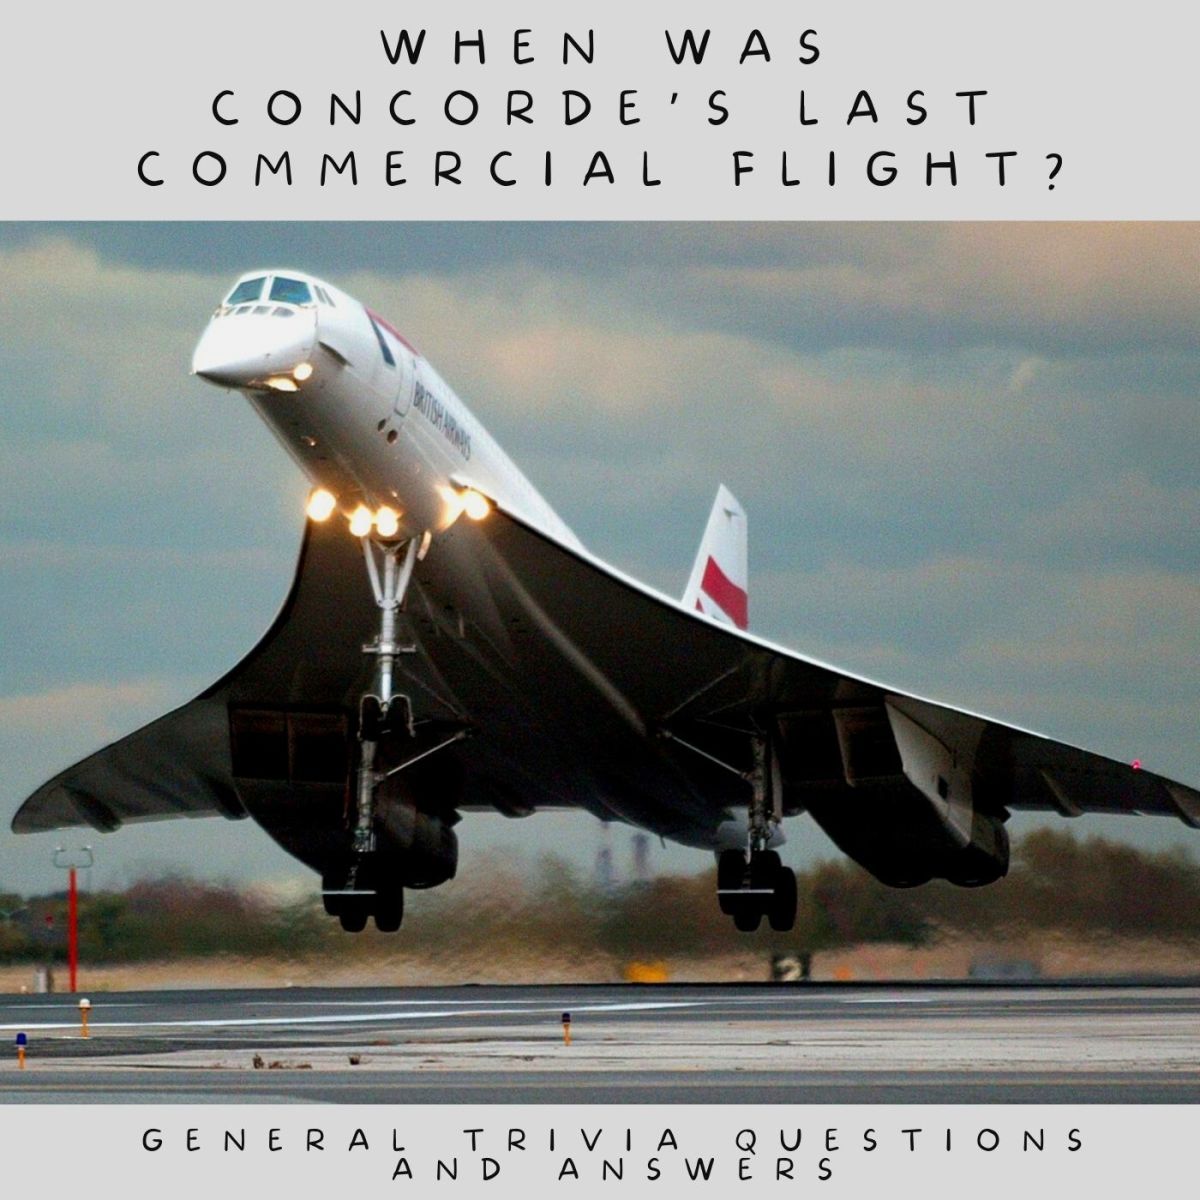 General Trivia Questions and Answers: When was Concorde’s last commercial flight? On October 24th, 2003, British Airways flew the final flight from New York JFK to London Heathrow.